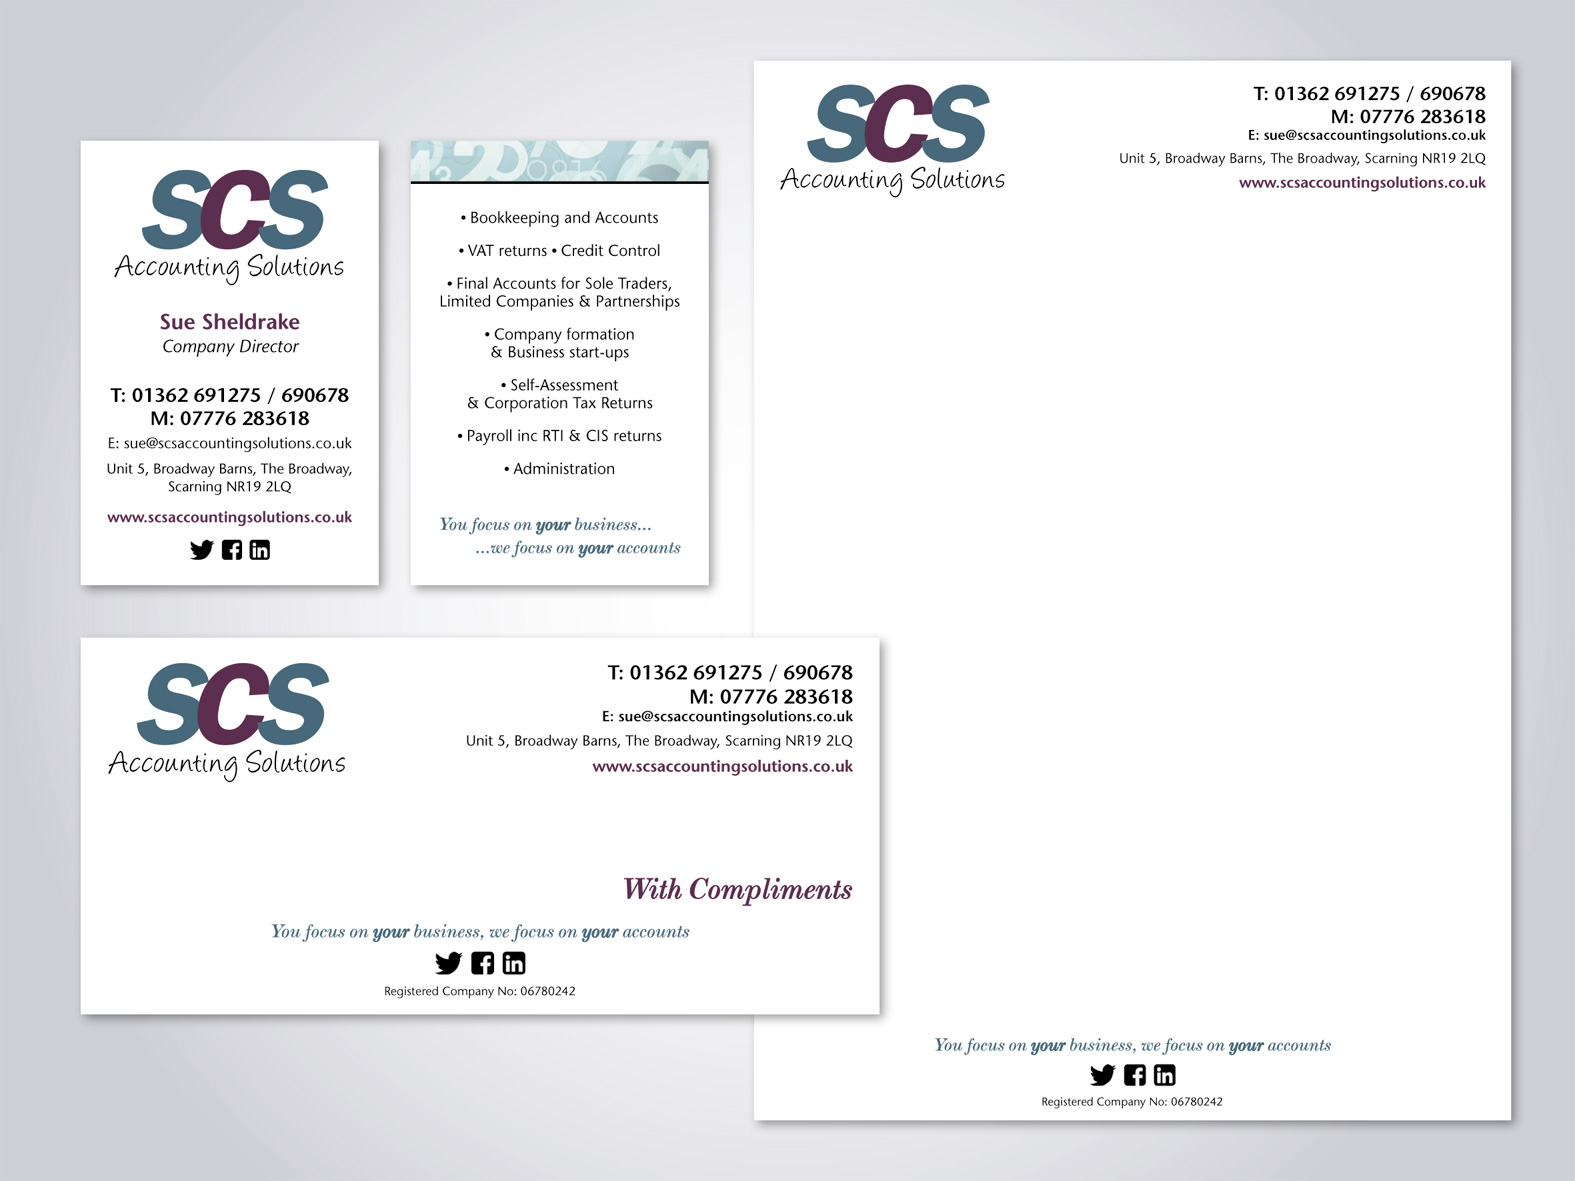 Business stationary for local accounting firm